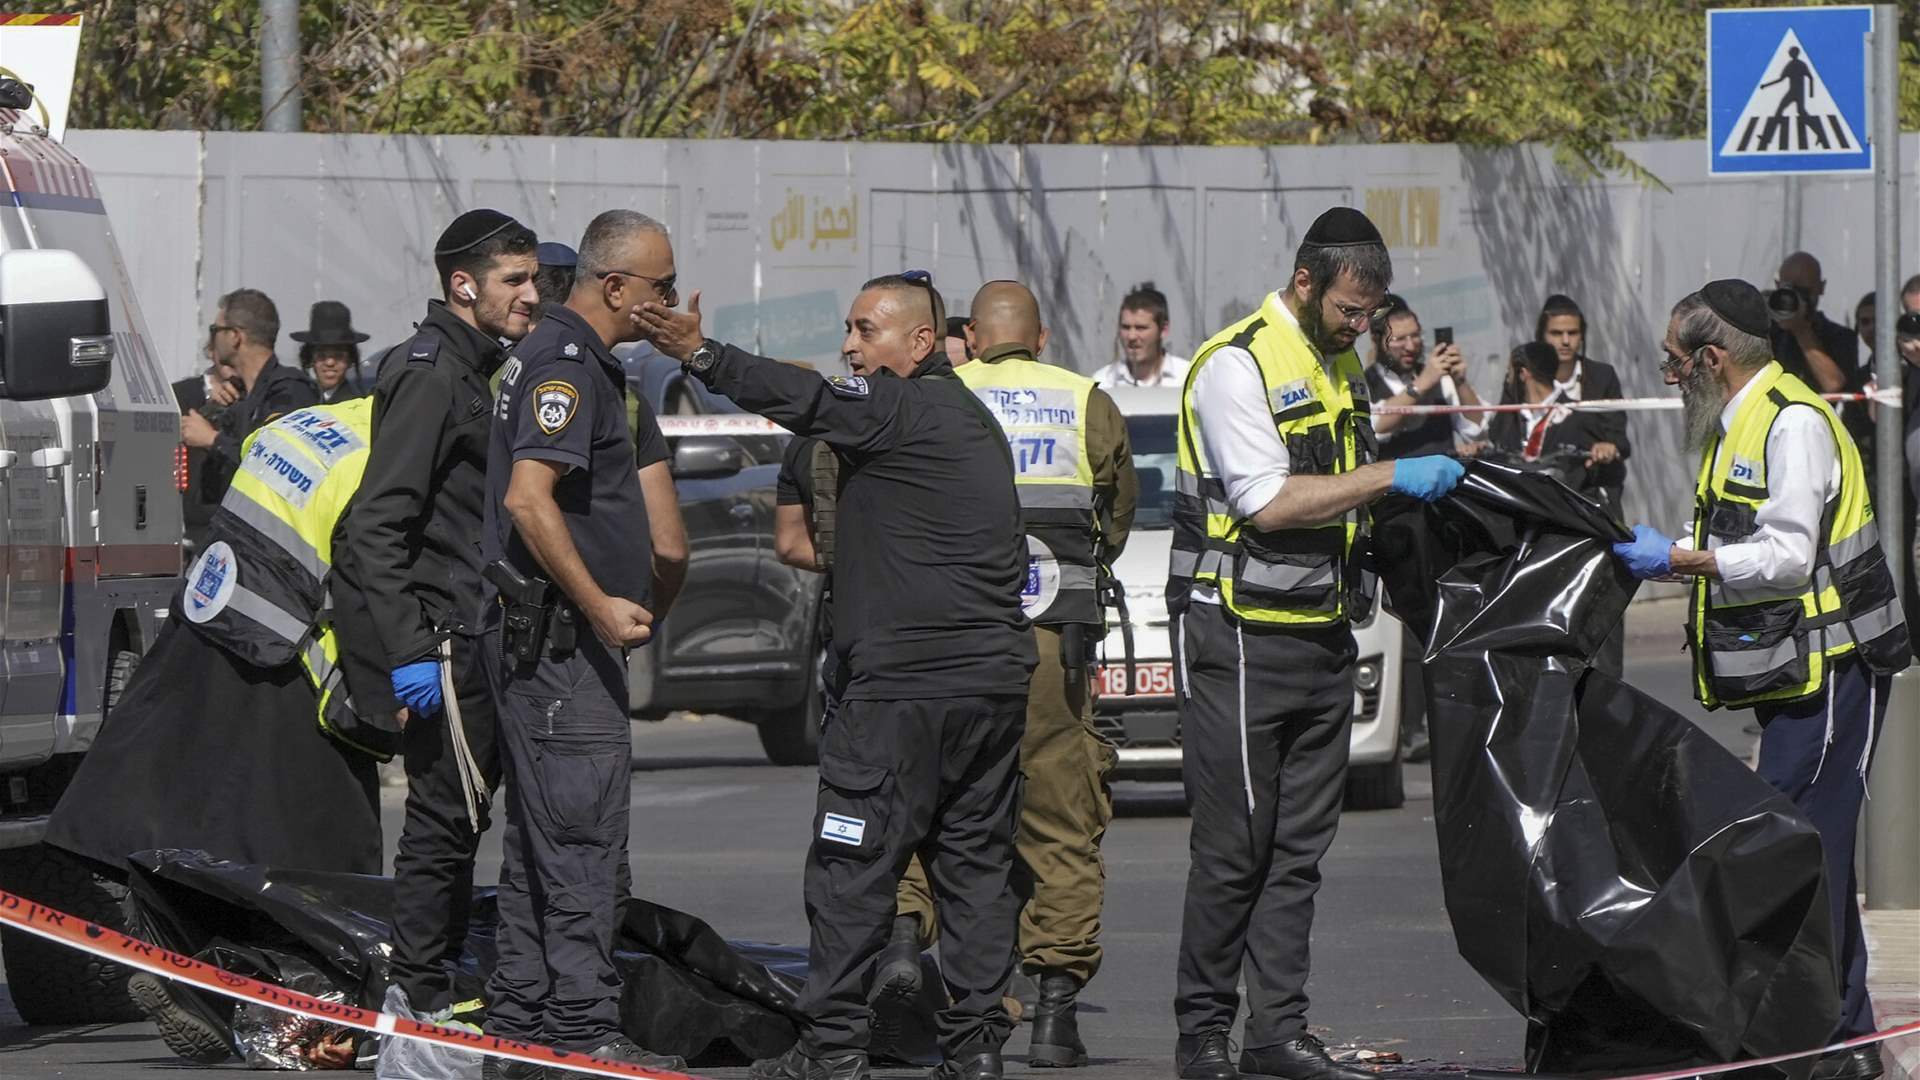 Canadian citizen attempted a stabbing attack in Israel, police say